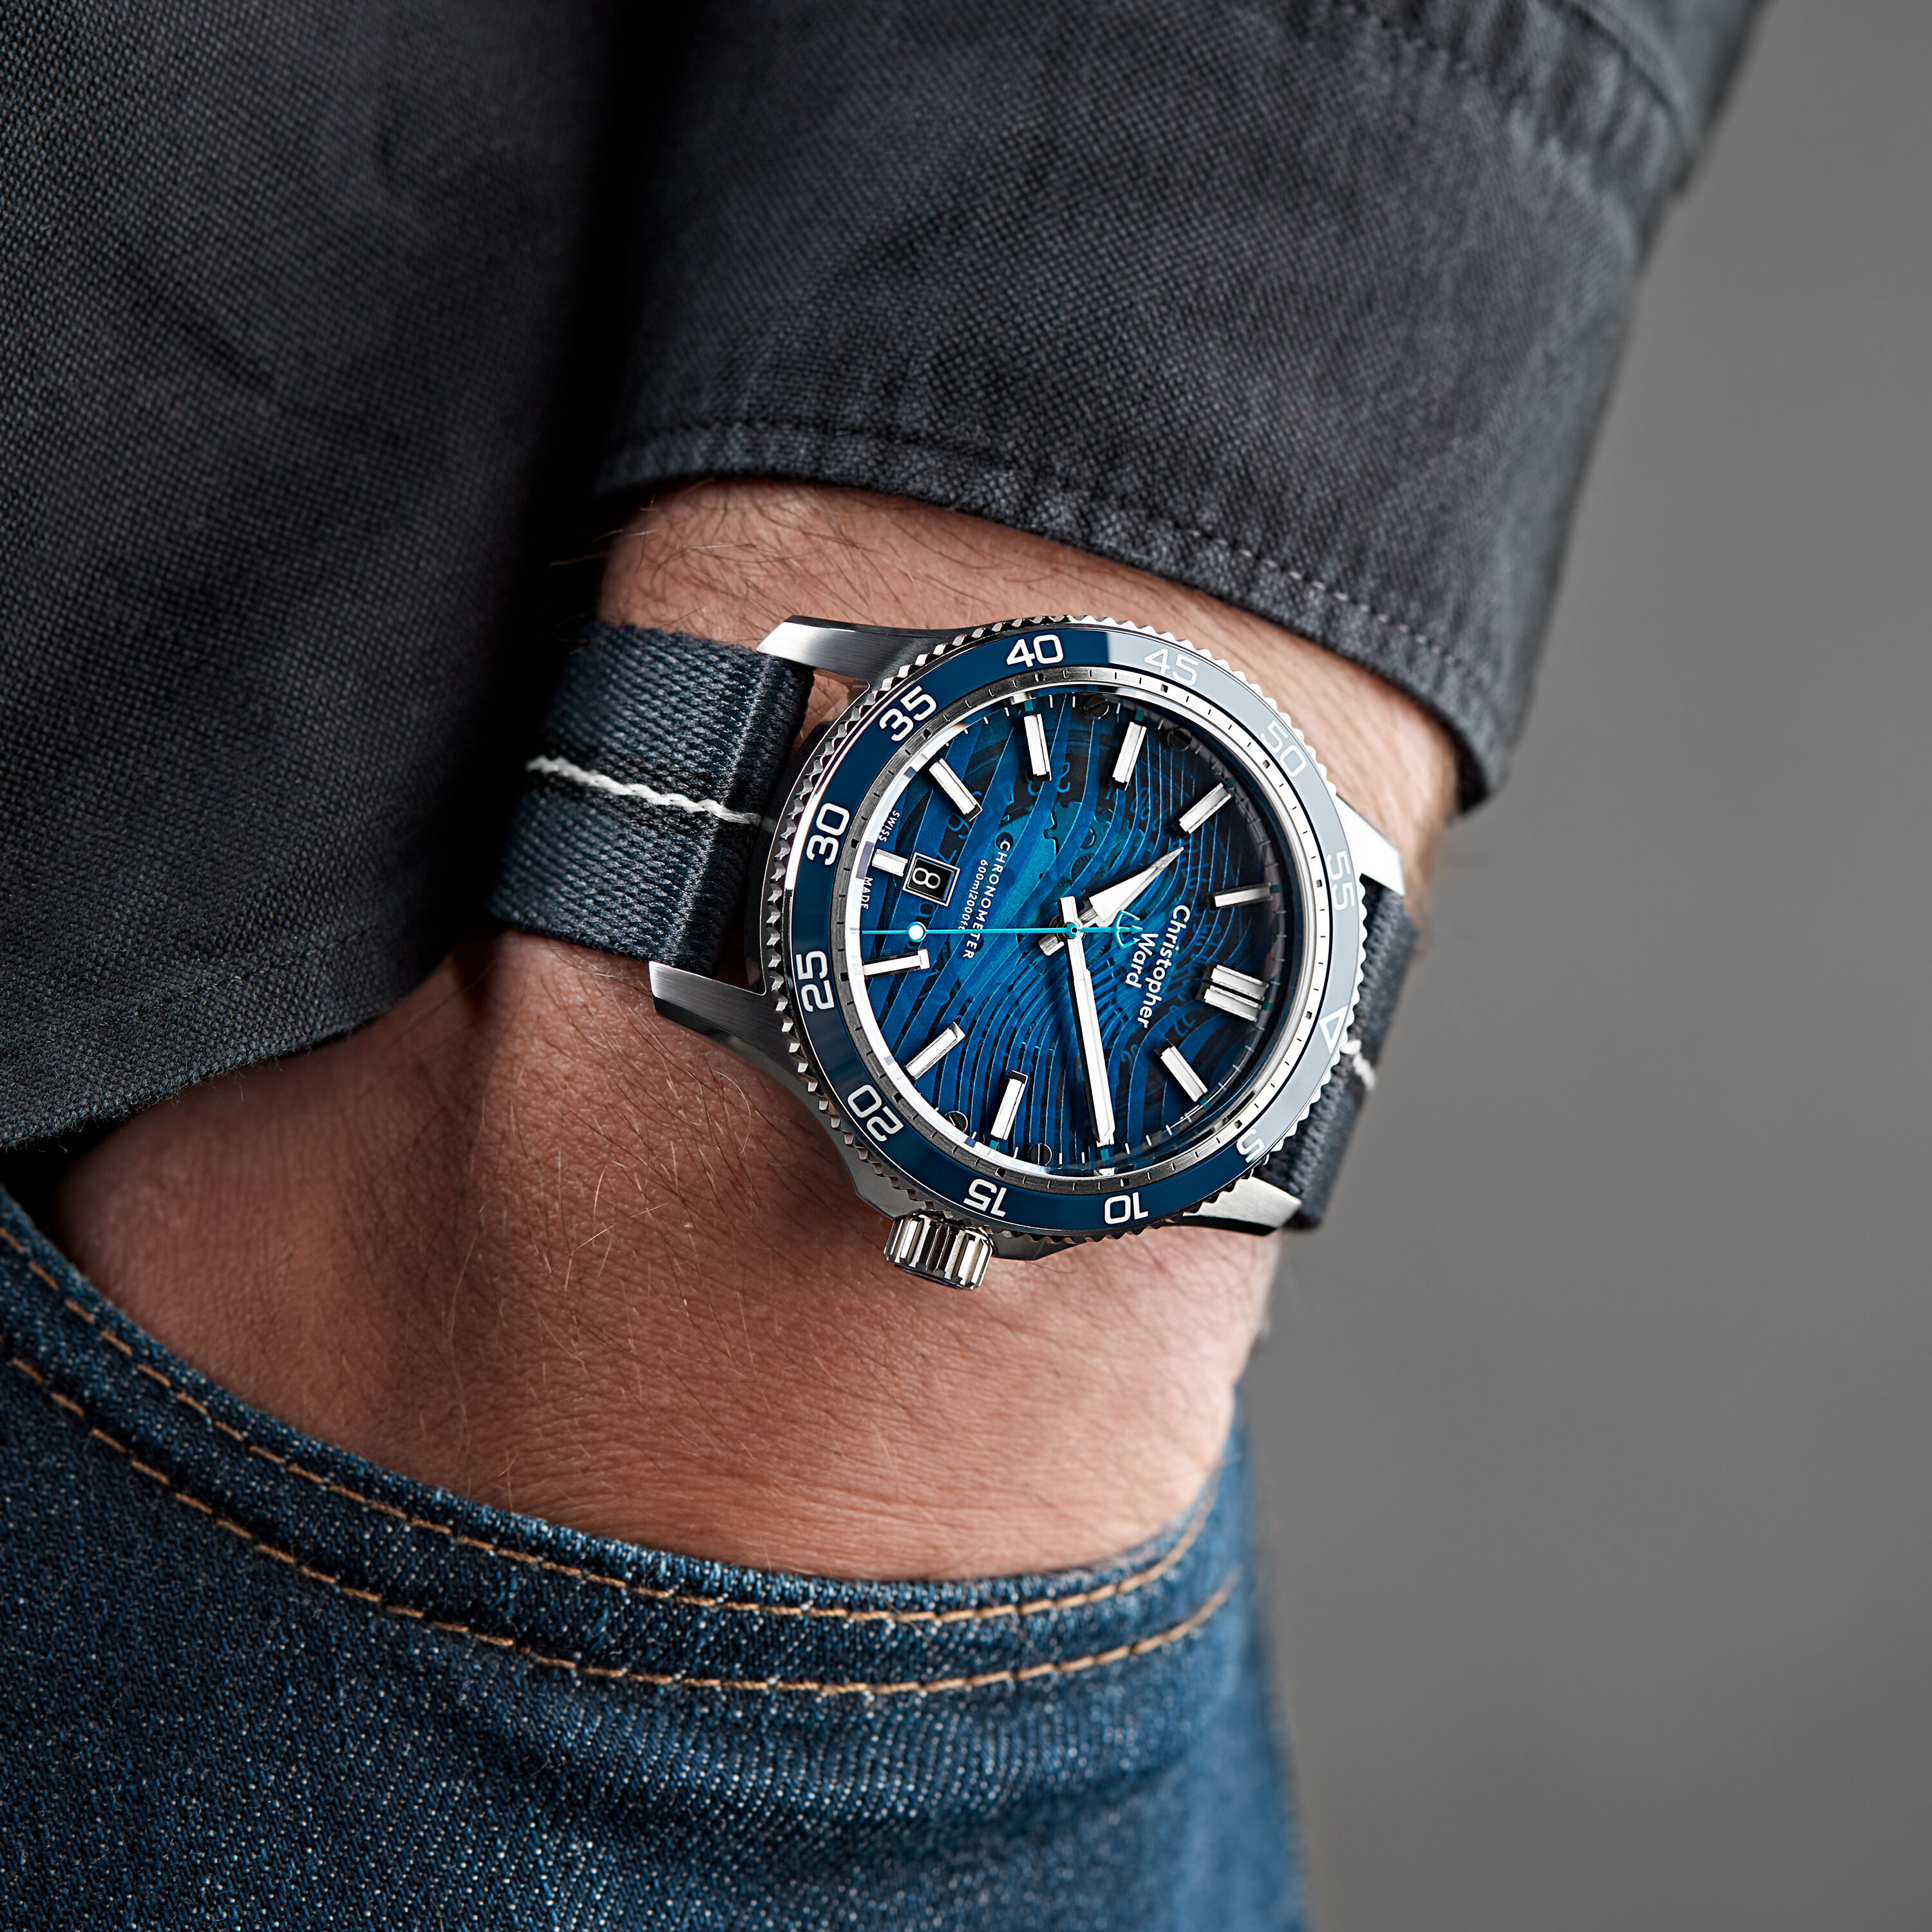 From the Editor: The Christopher Ward C1 Bel Canto is the Most Unexpected  Watch of 2023. An Amazing Timepiece for the Price. — WATCH COLLECTING  LIFESTYLE